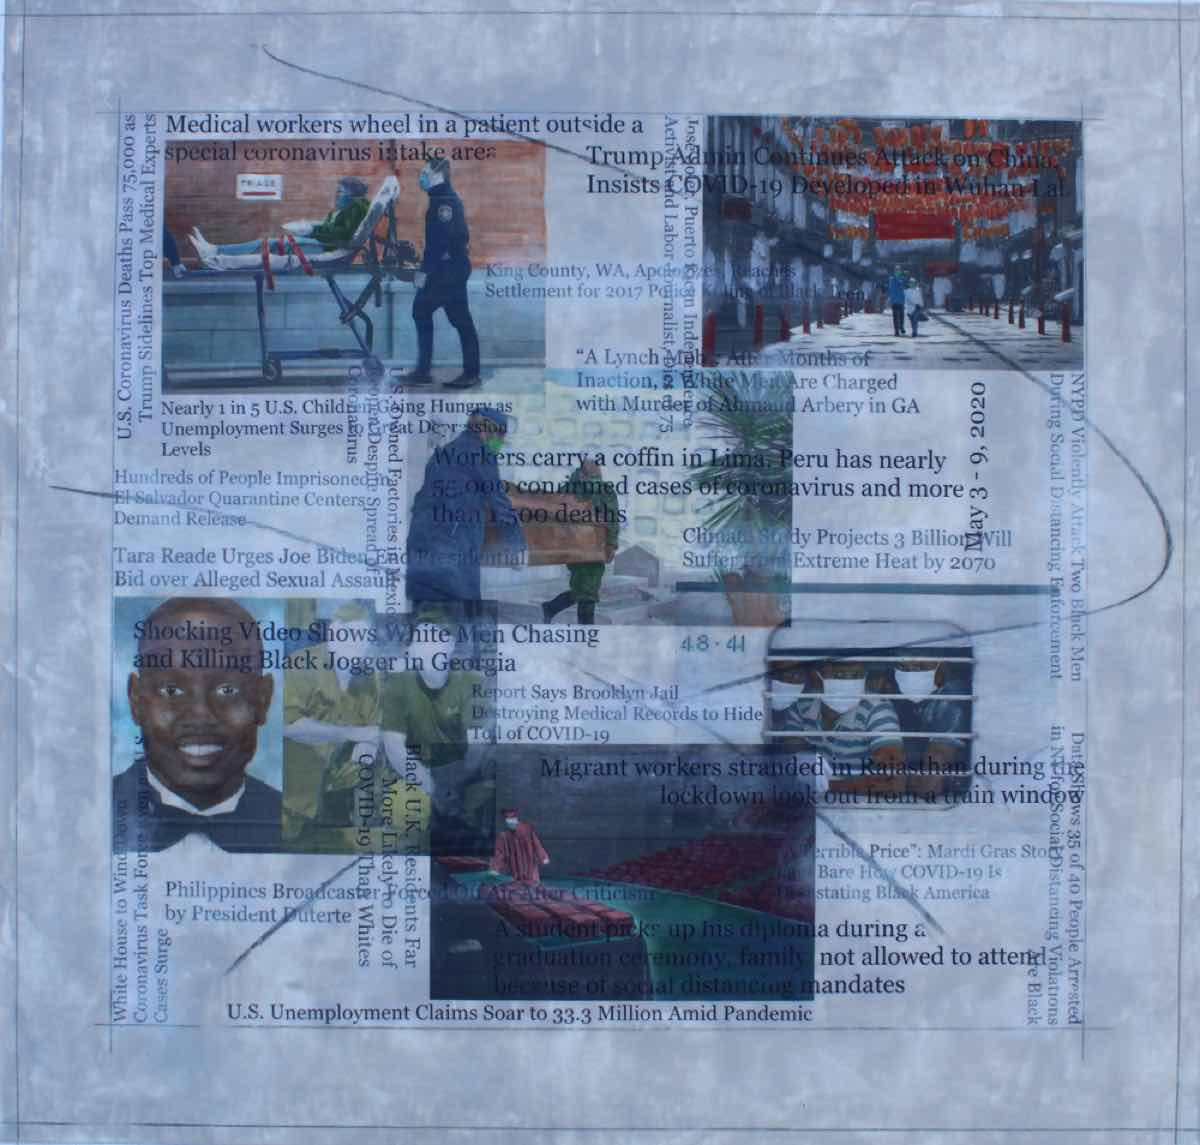 Headlines (May 3-8, 2020), 22 by 23. inches, acrylic, charcoal, graphite and image transfers on canvas, 2020